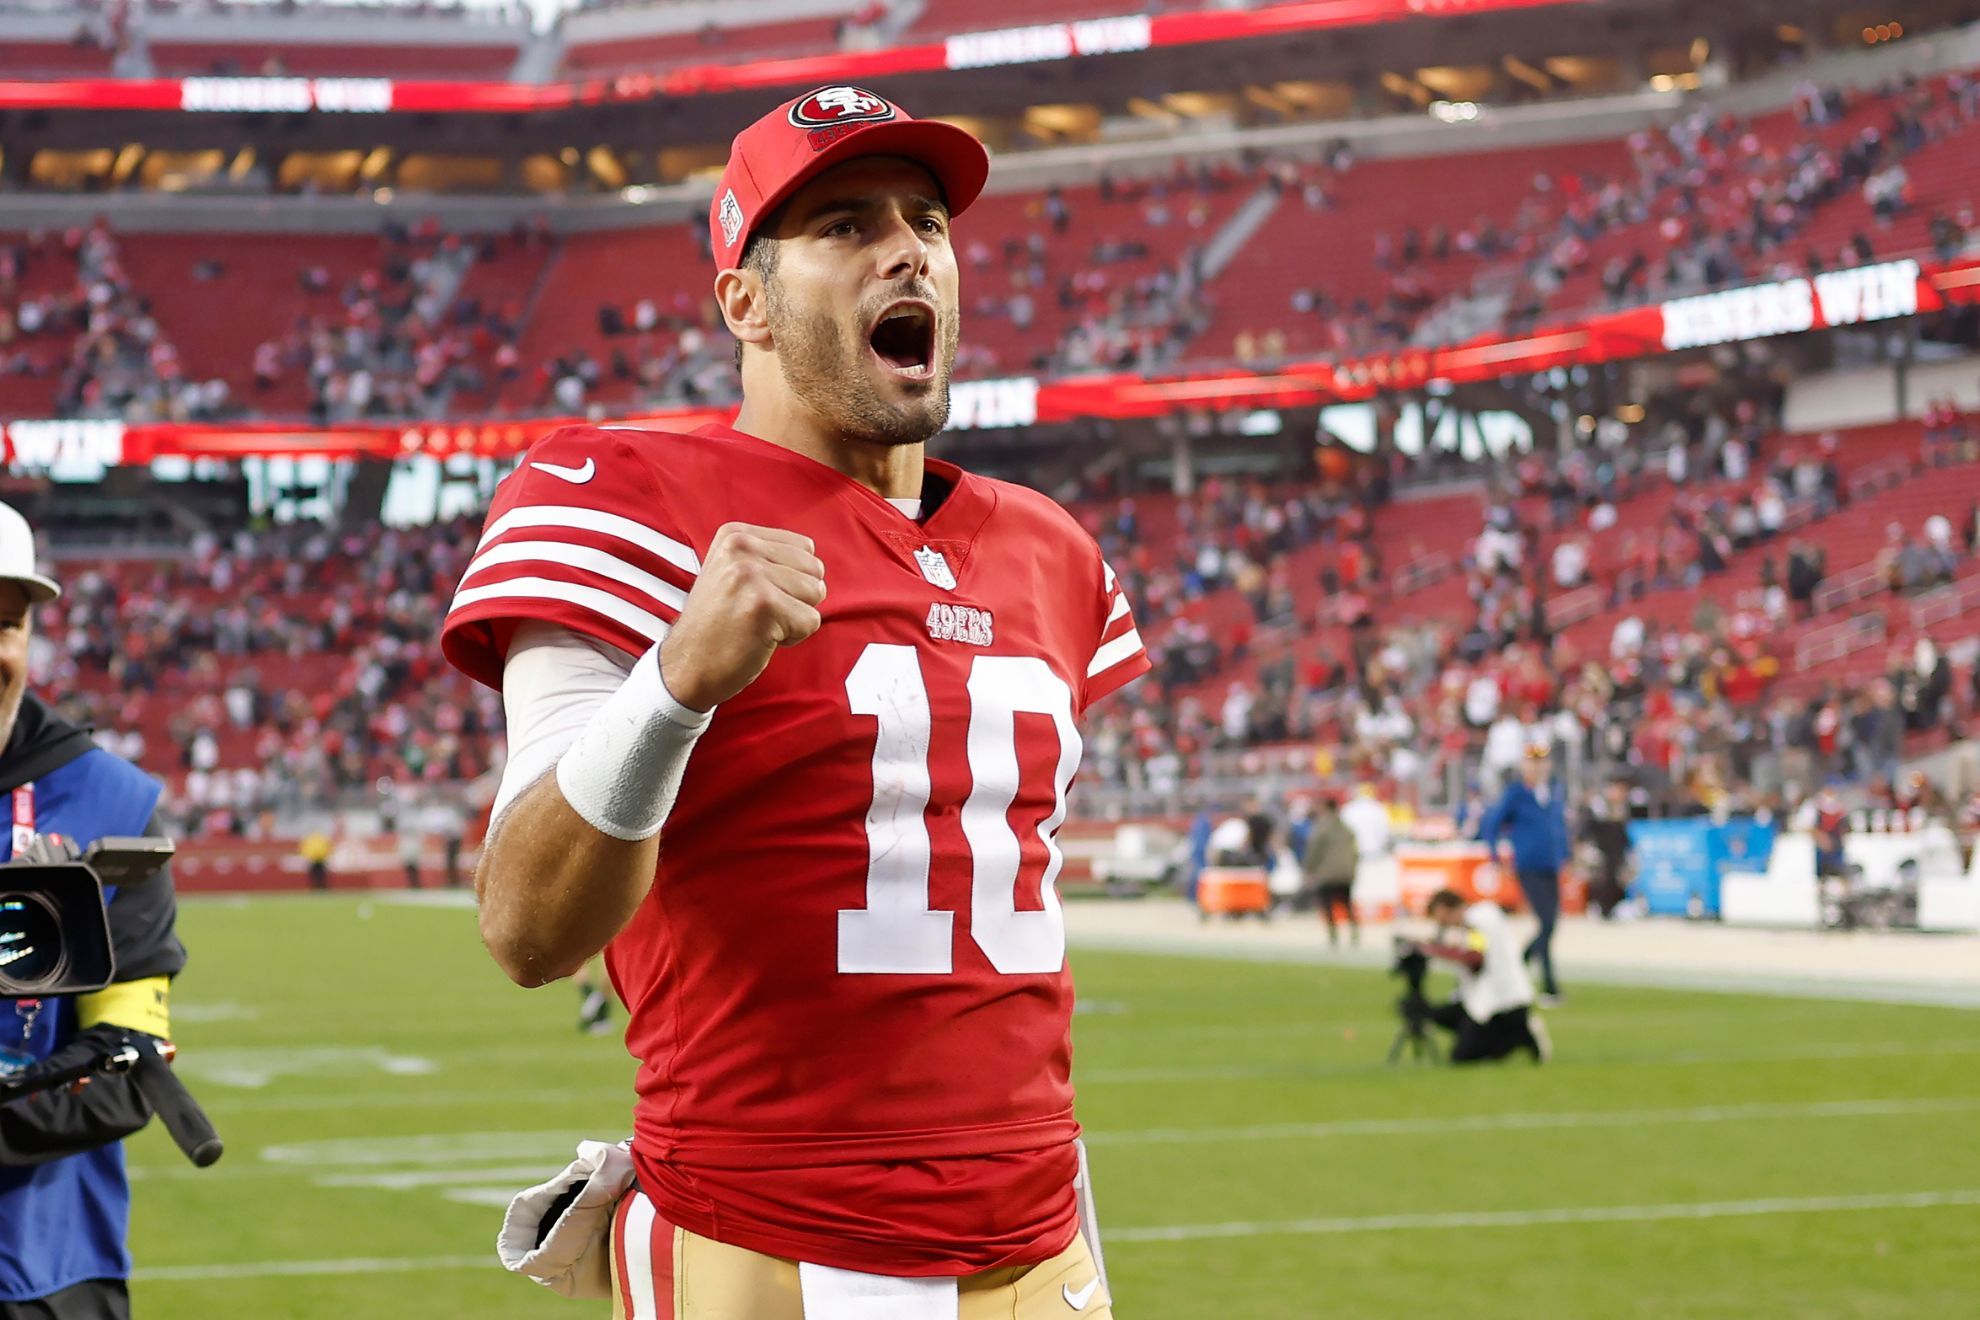 Is losing Super Bowl LVIII to Chiefs Karma for how 49ers treated Jimmy Garoppolo?